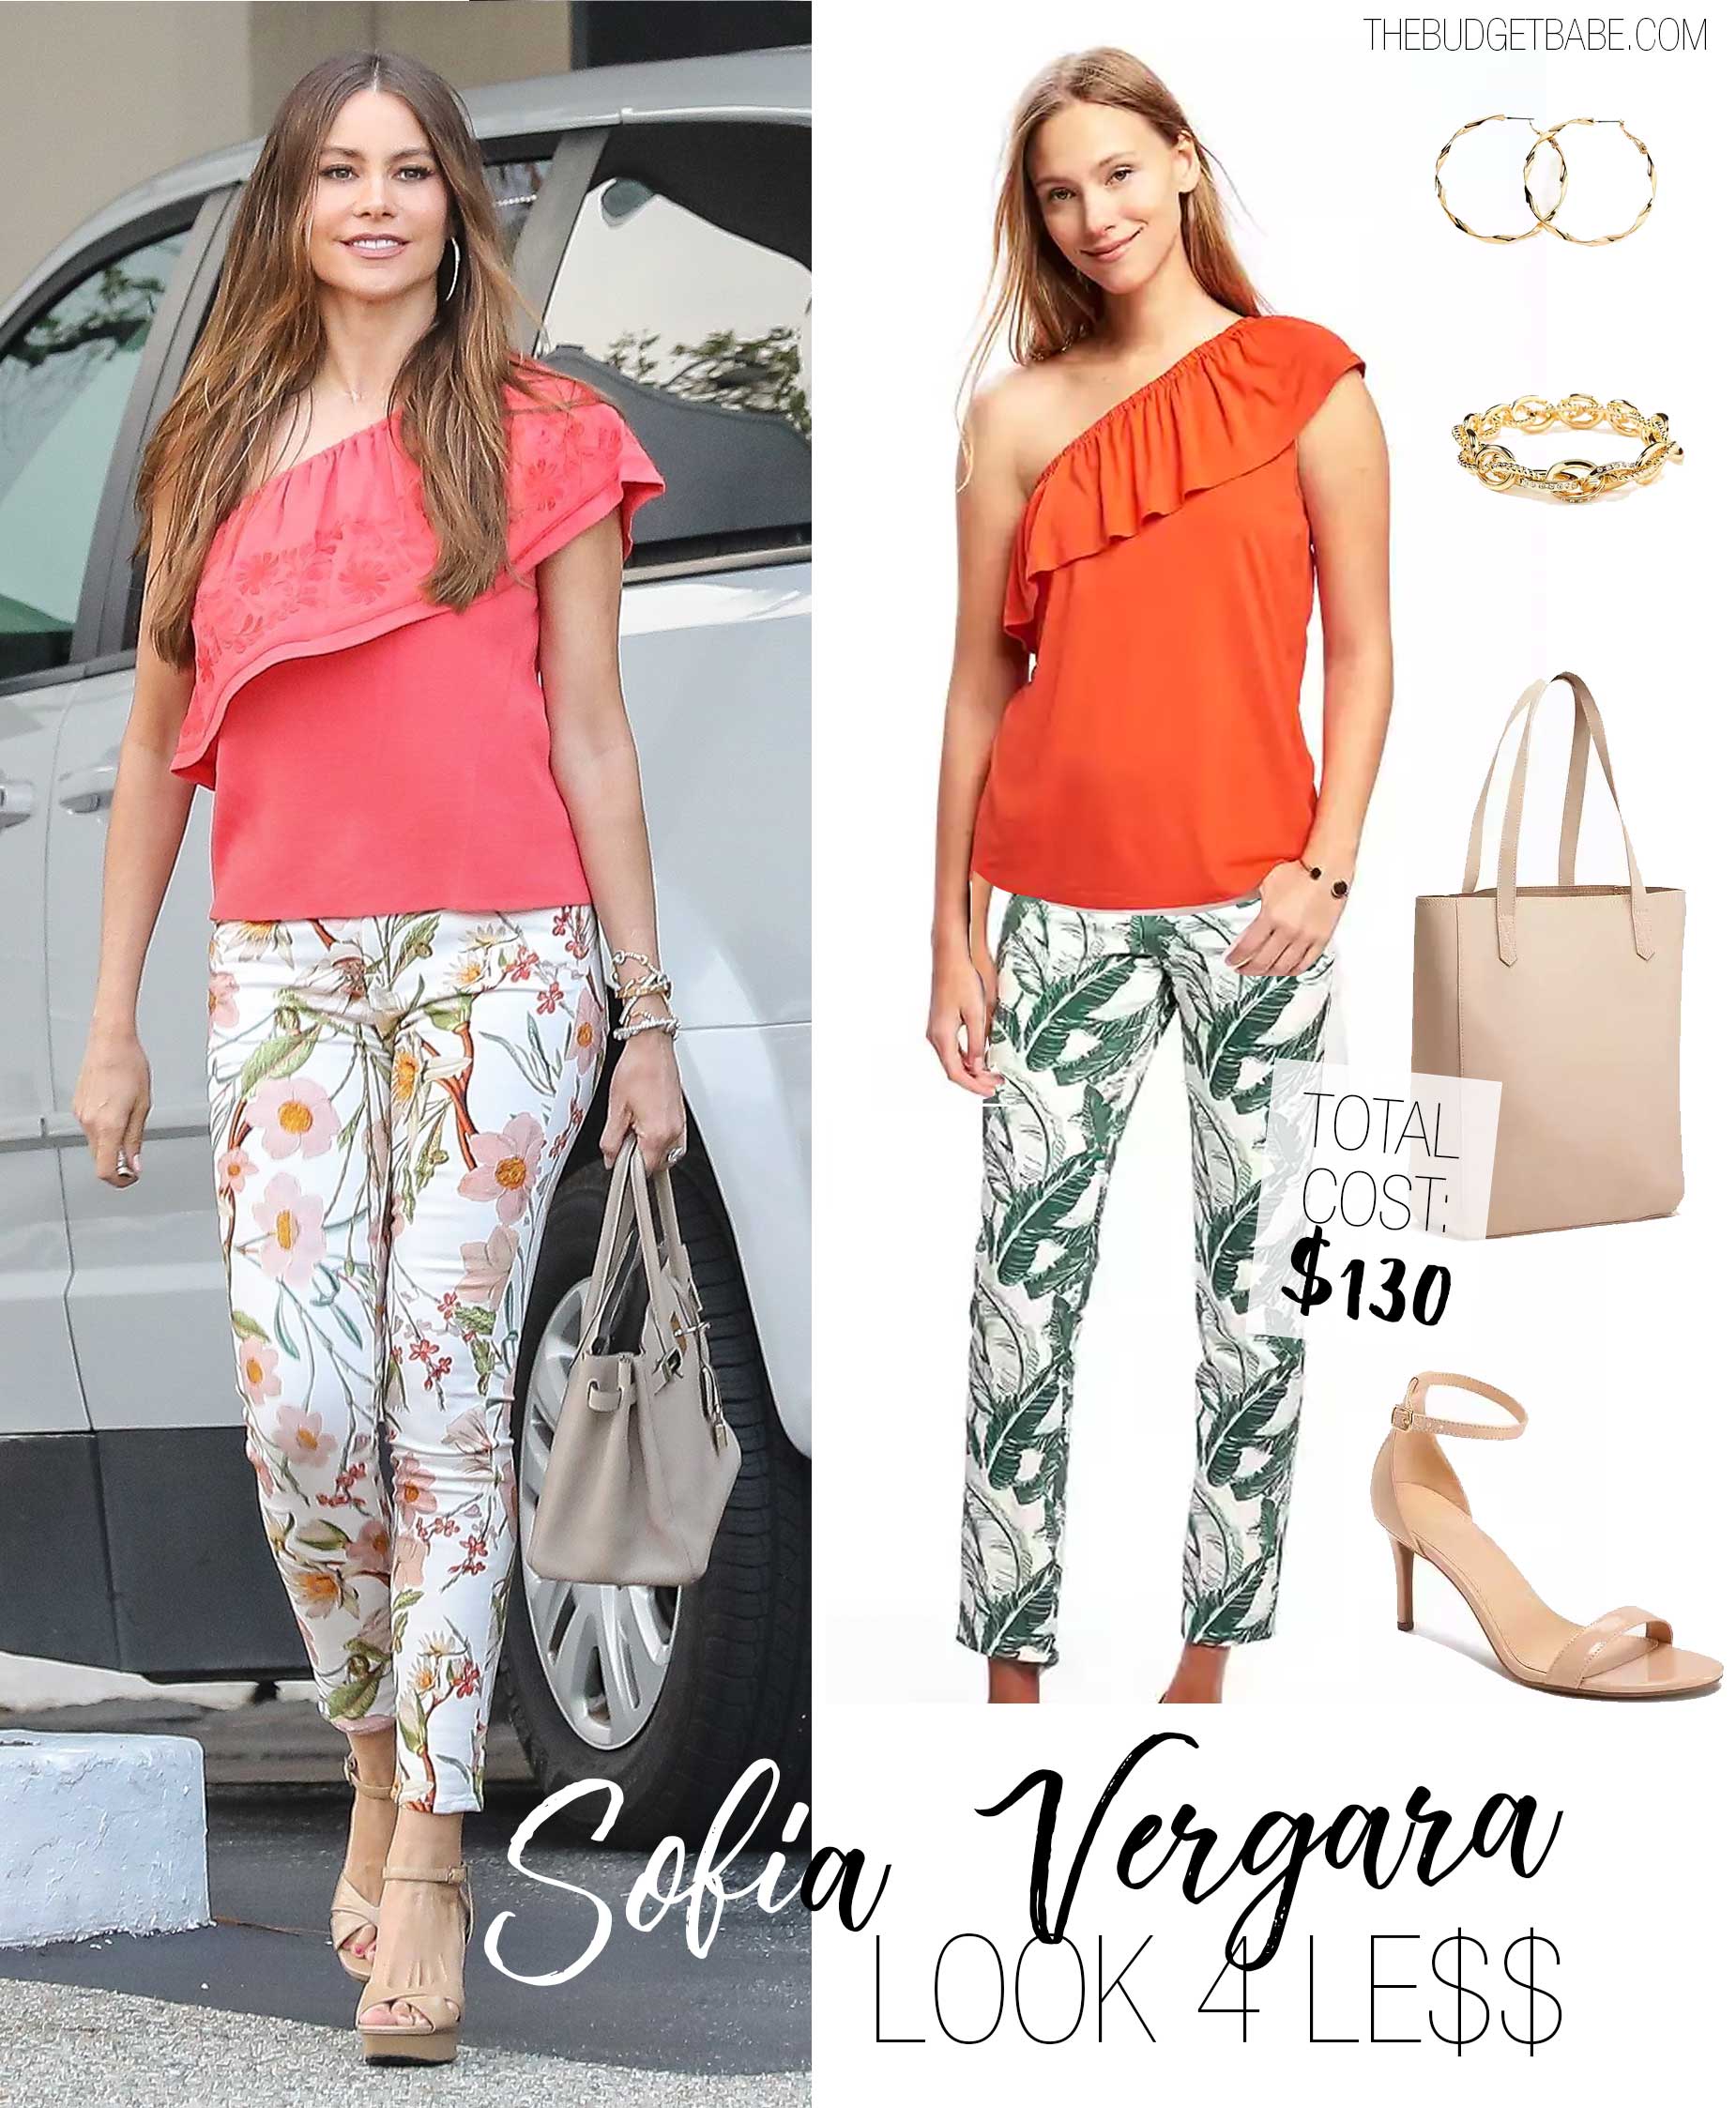 Sofia Vergara wears a one shoulder coral ruffle top with floral print pants and nude platform sandals.